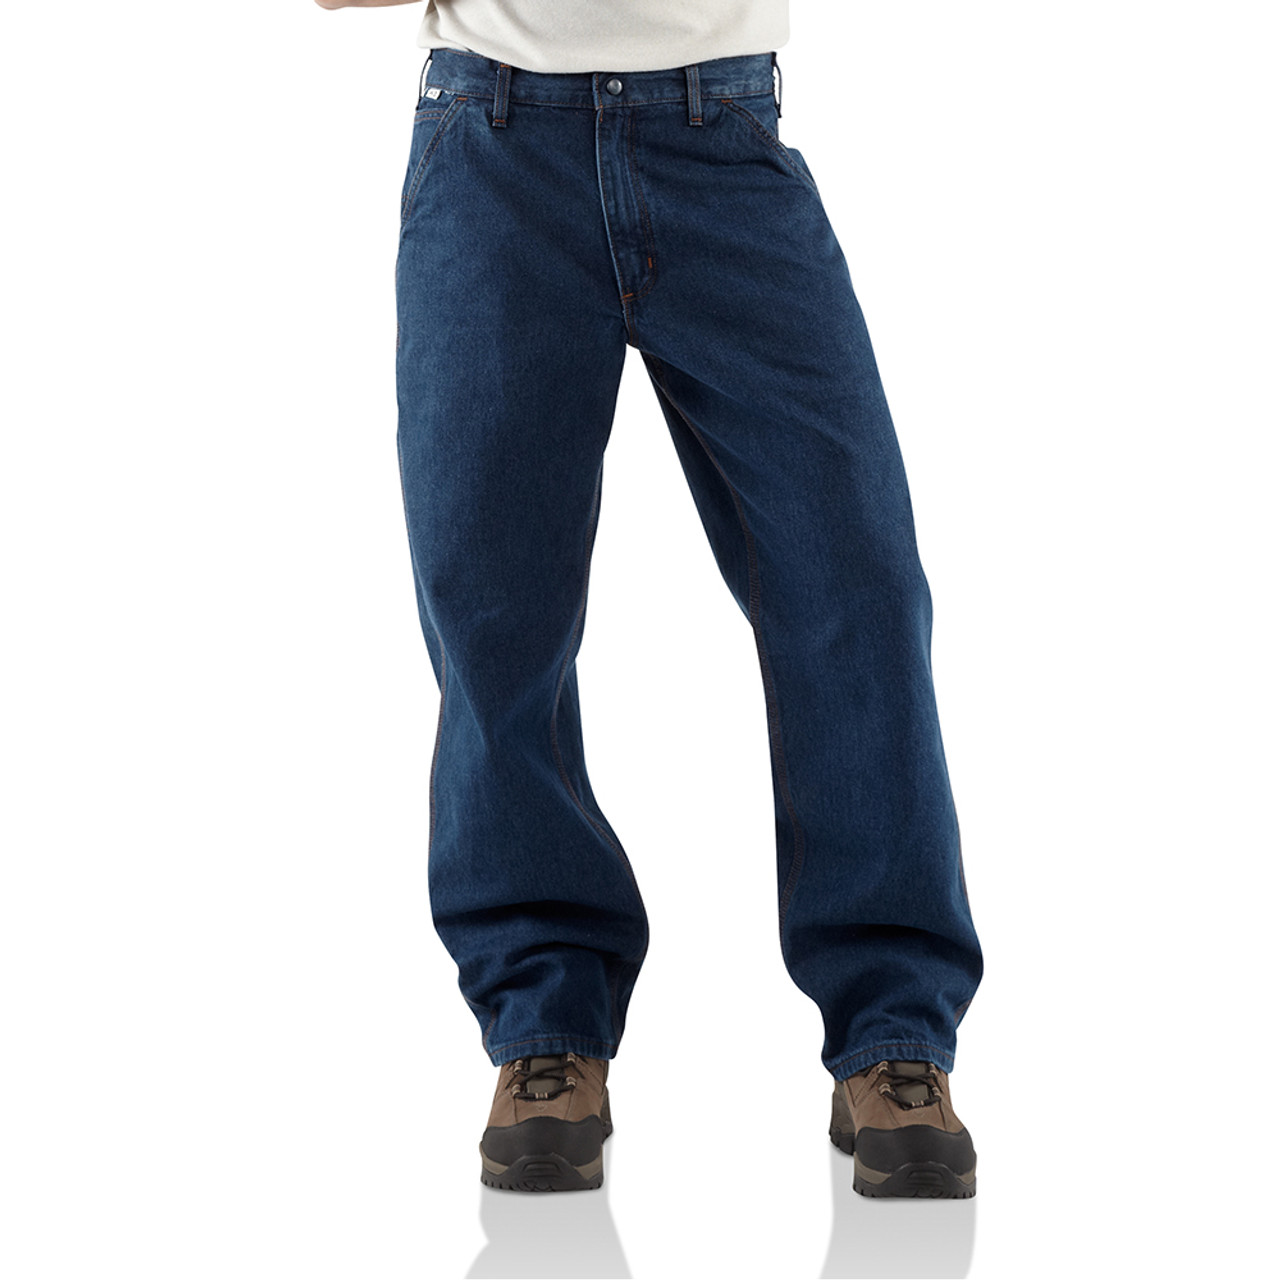 Carhartt Men's Full Swing Relaxed Fit Dungaree Work Jeans - Big